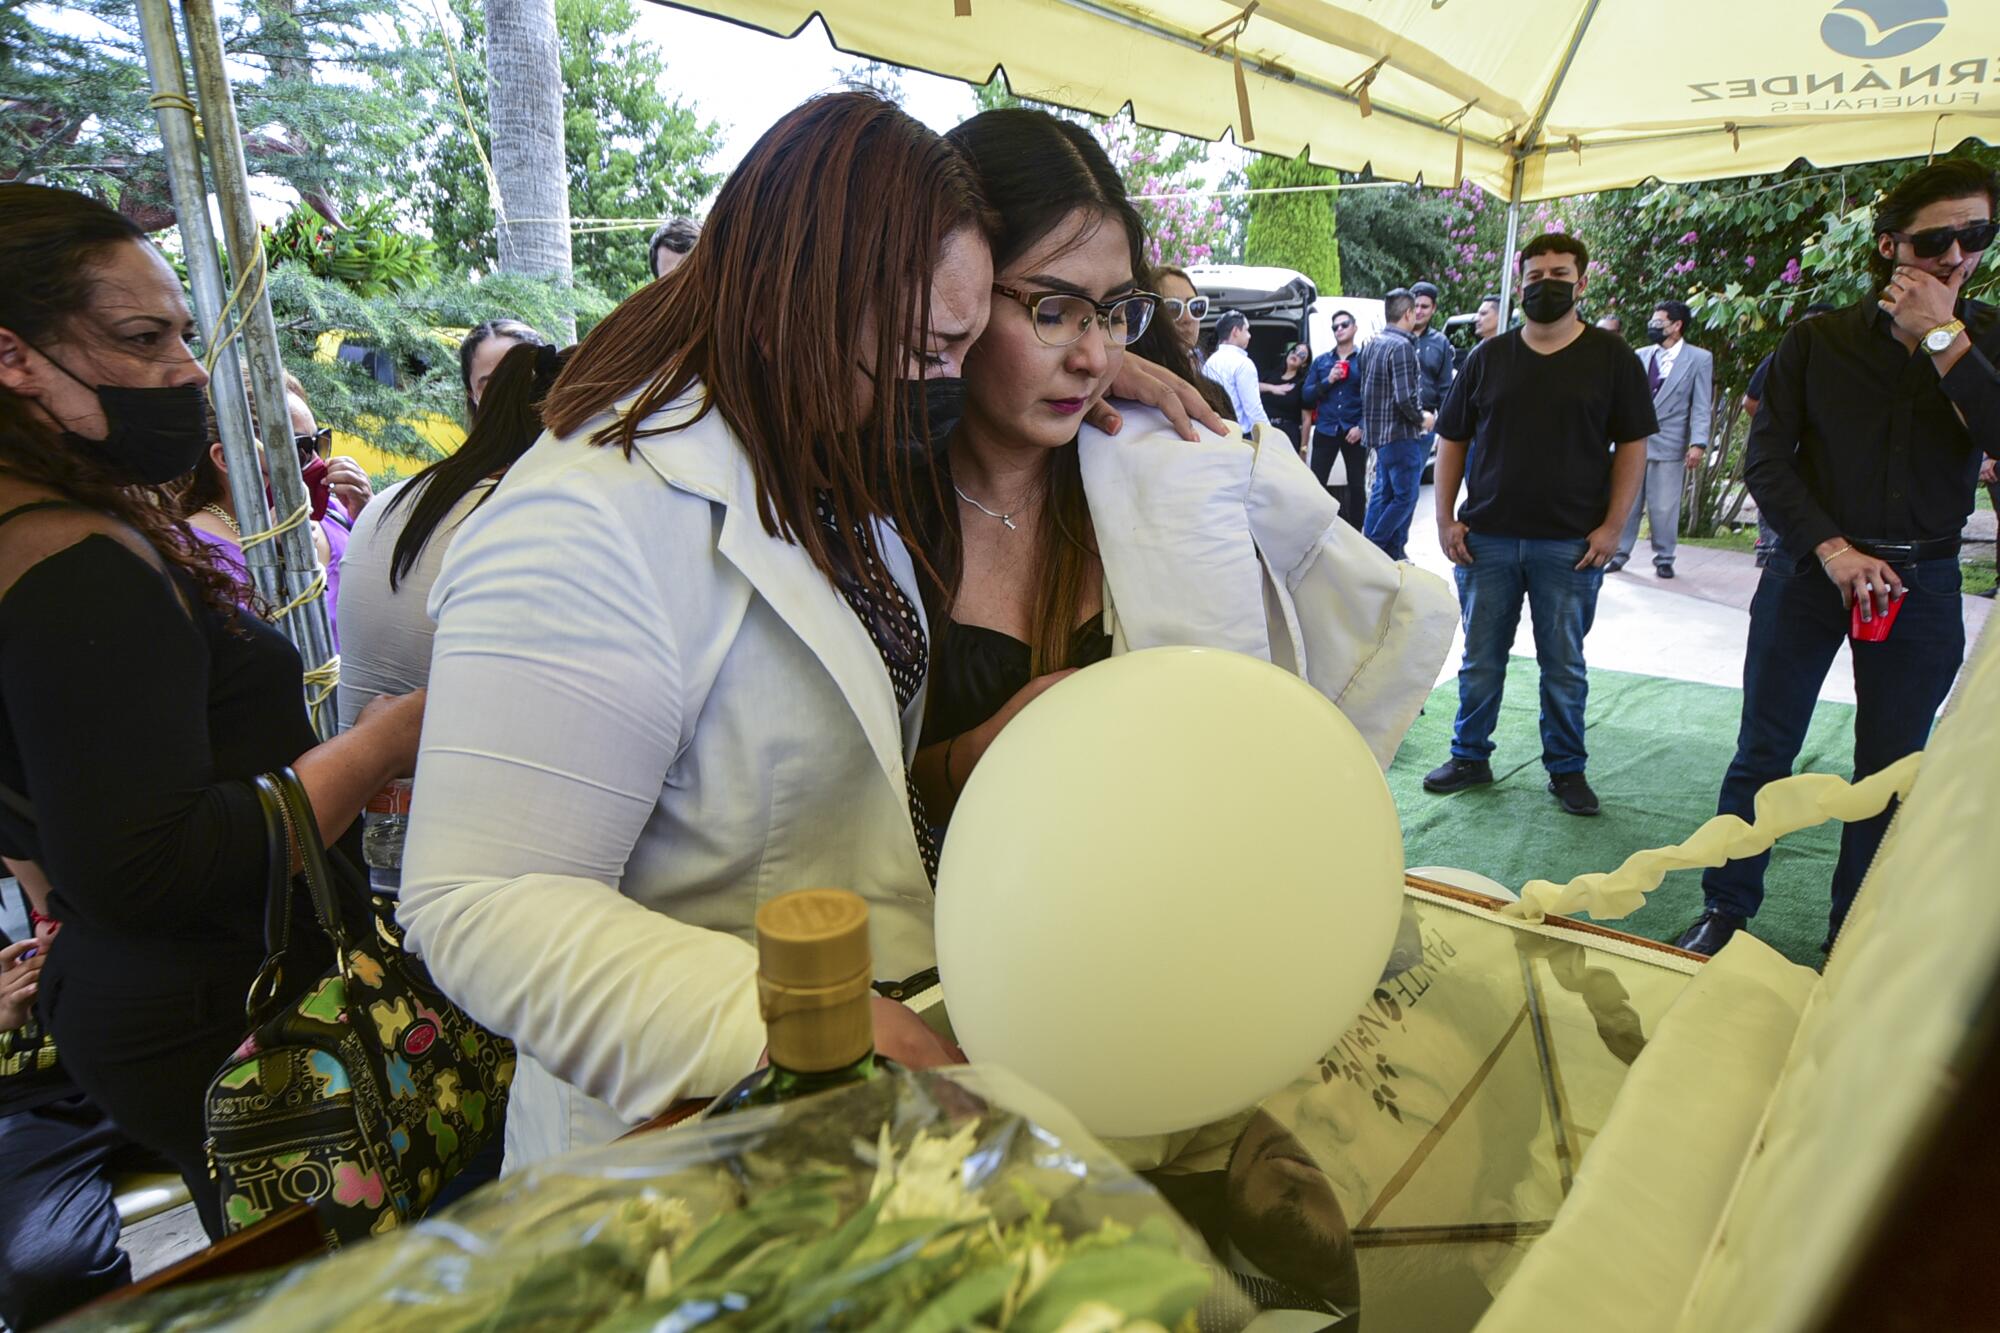 Two women embrace as they stand over a casket